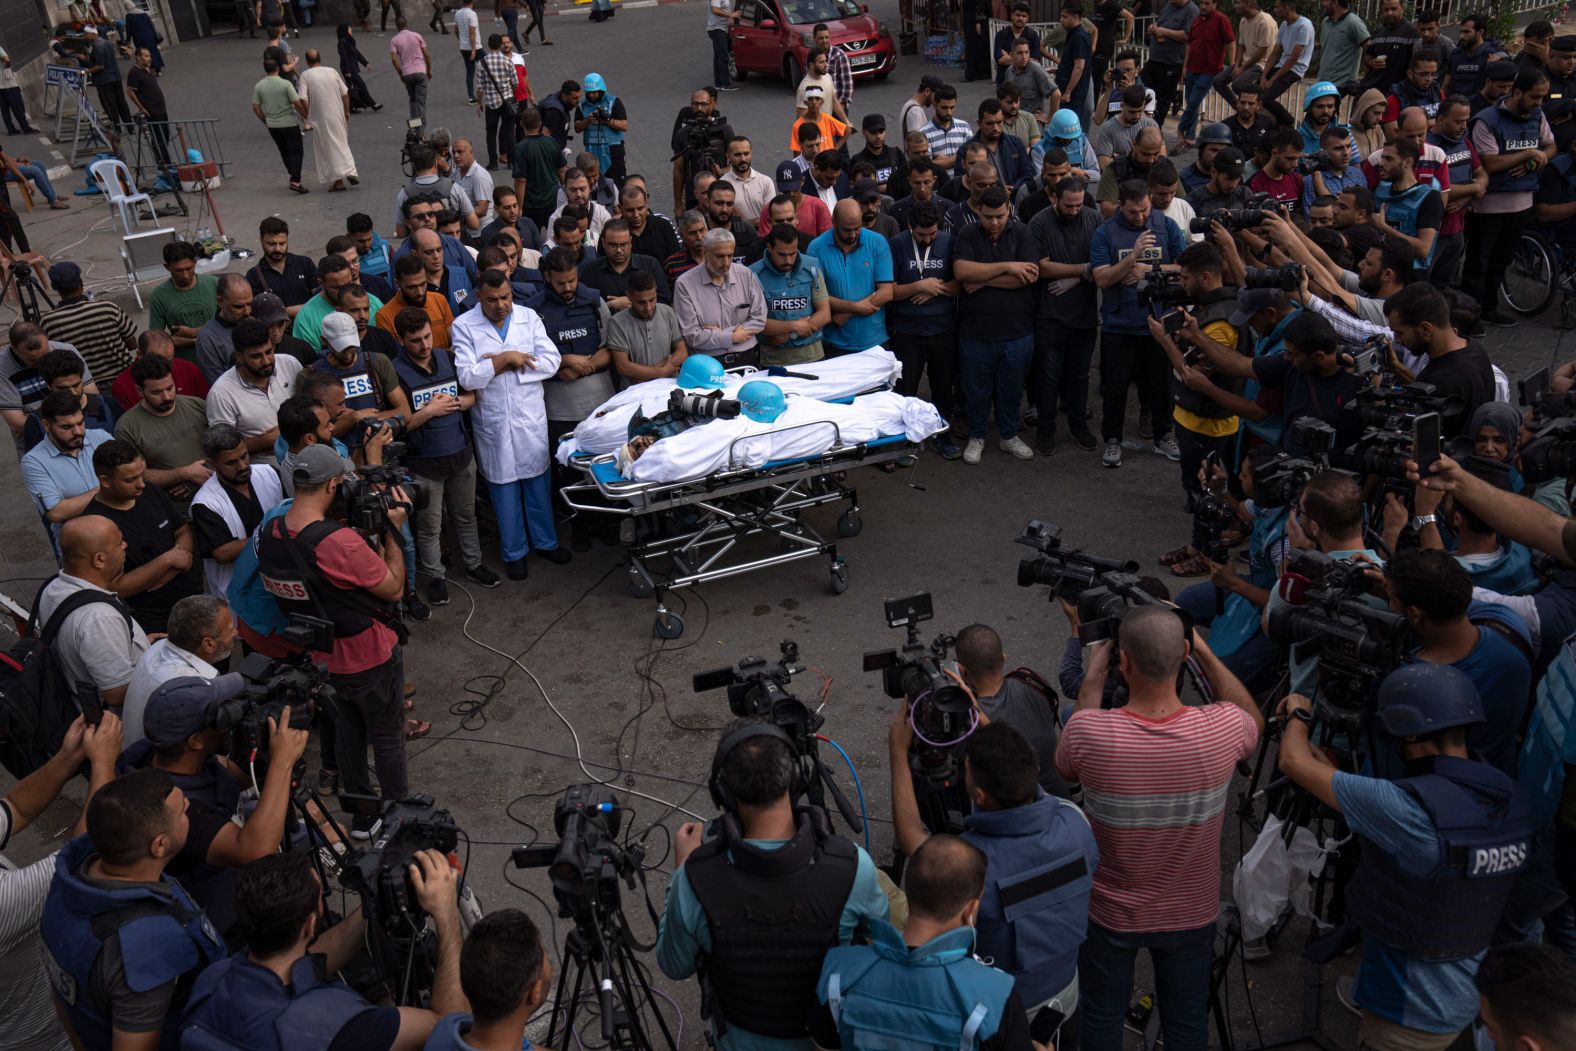 People gather around the bodies of two Palestinian reporters, Mohammed Soboh and Said al-Tawil, who were killed by an Israeli airstrike in Gaza City on Tuesday, October 10.